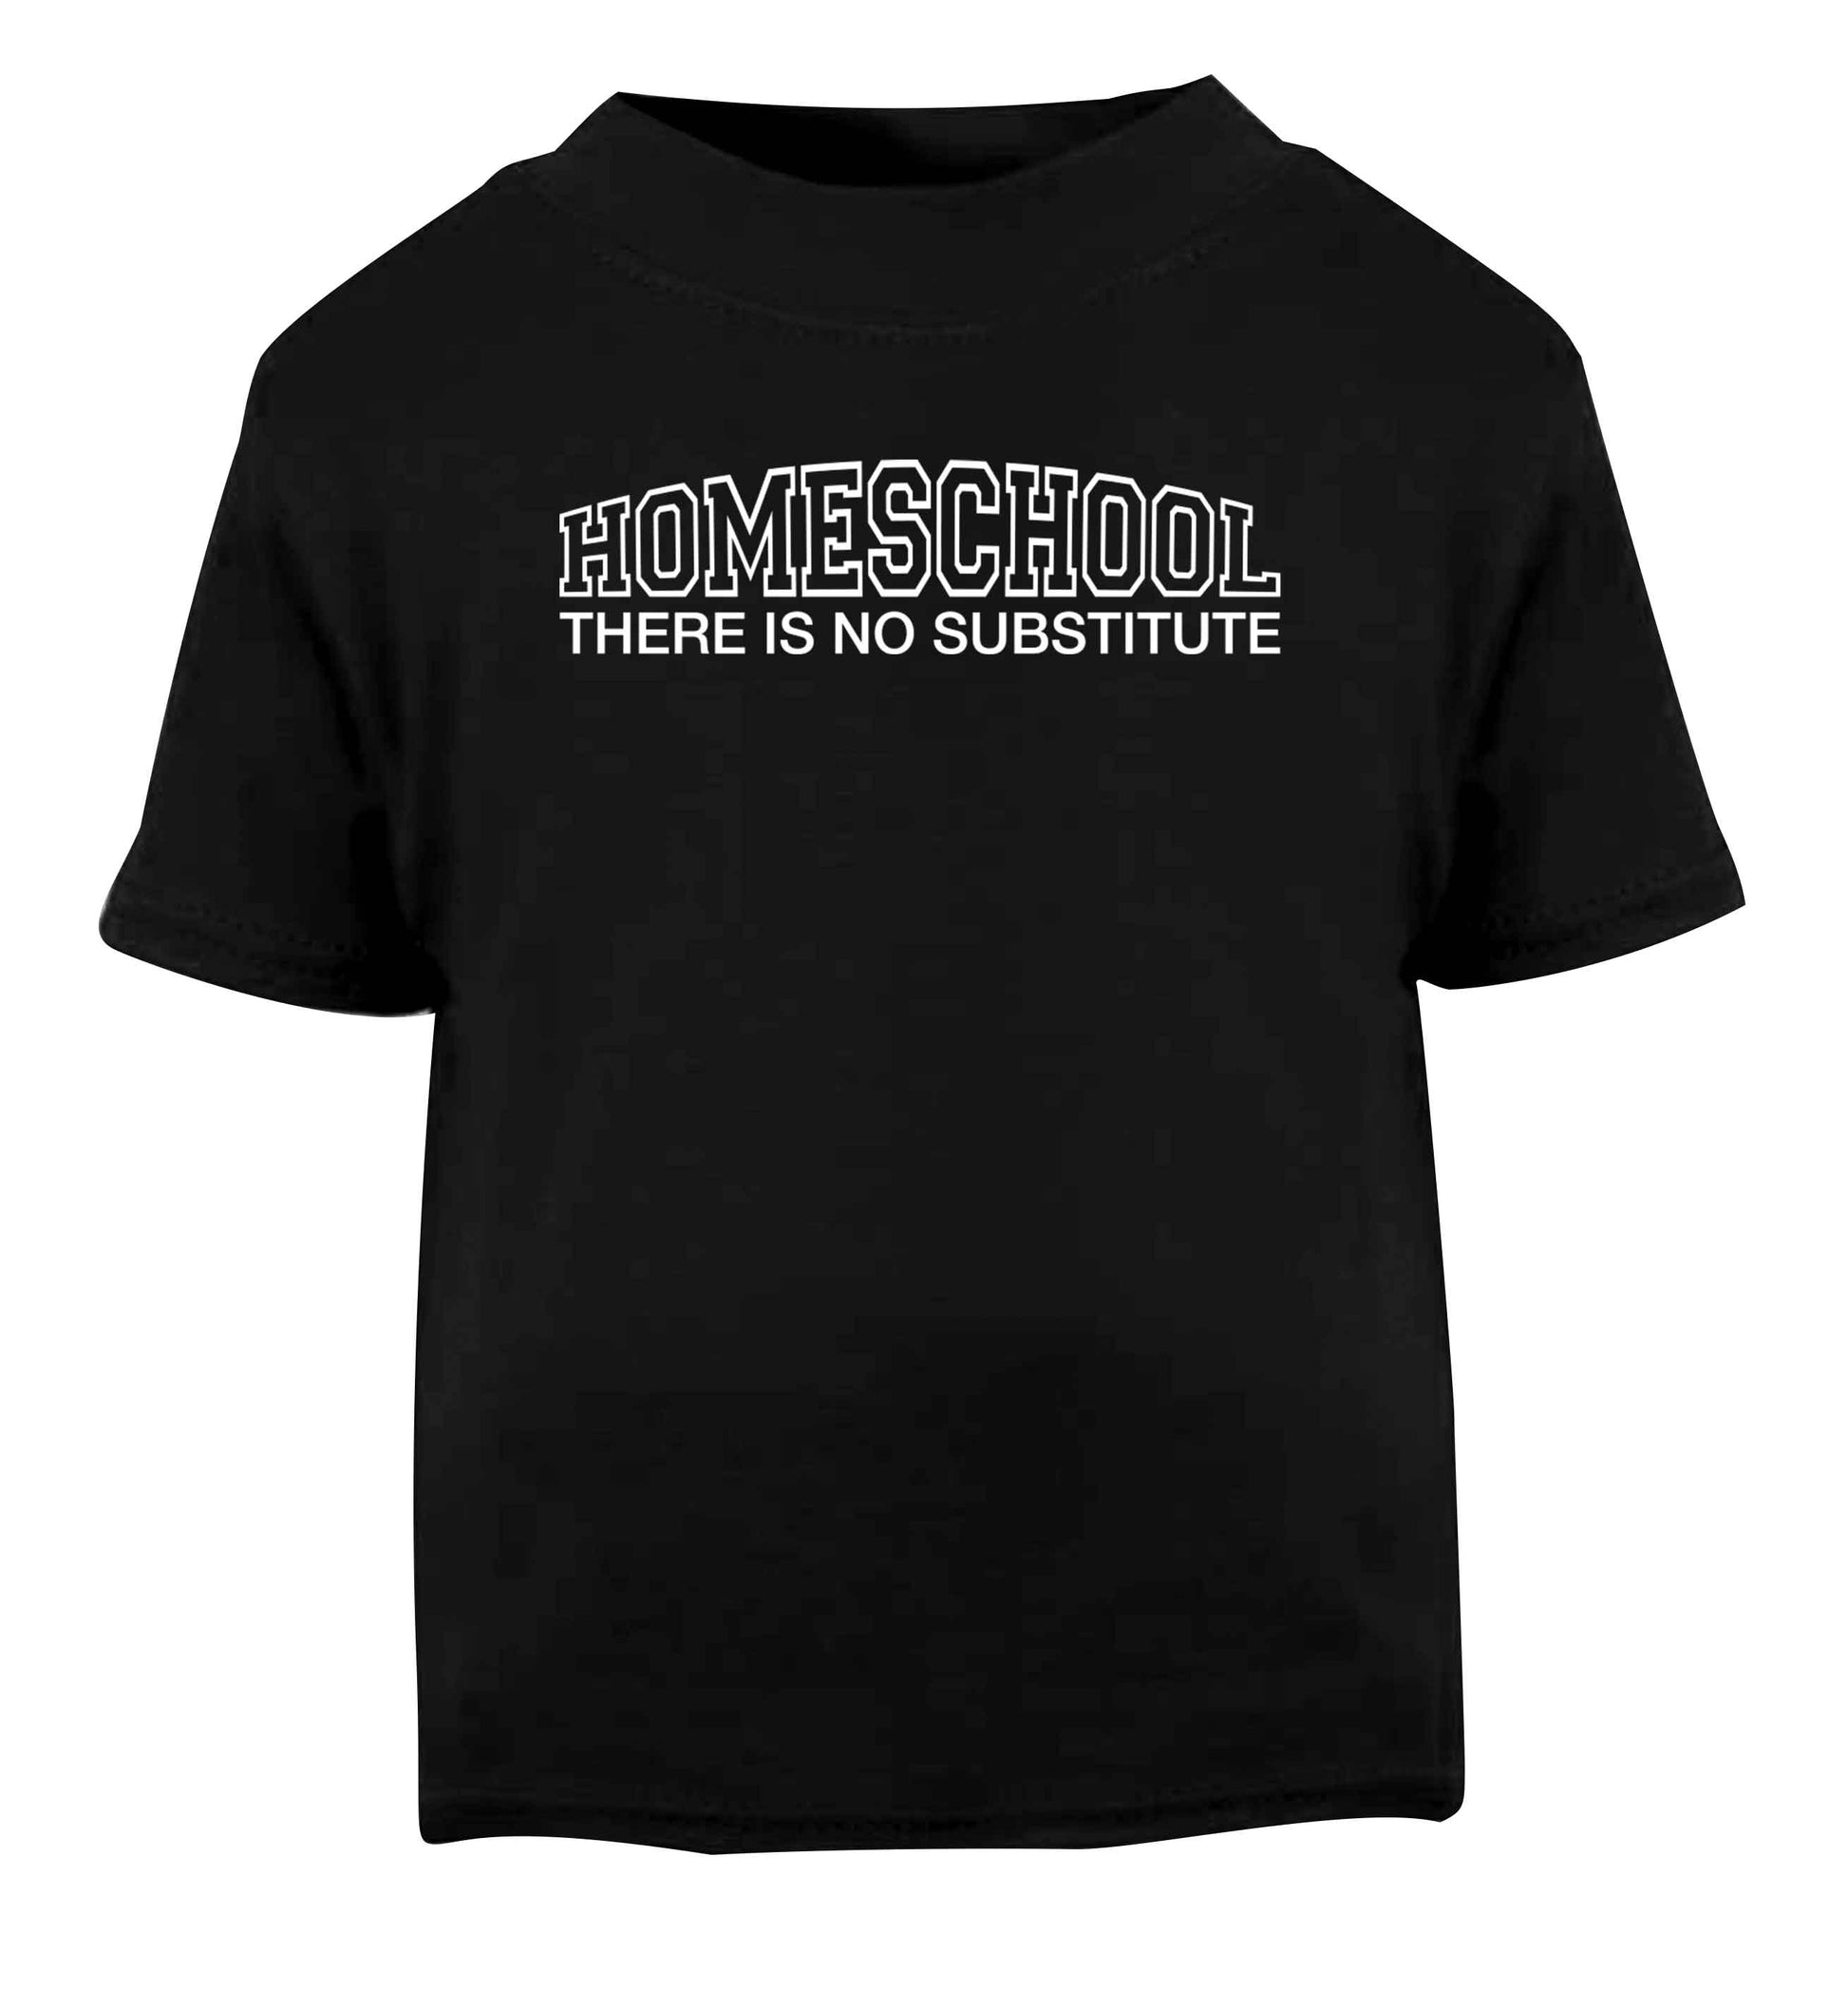 Homeschool there is not substitute Black Baby Toddler Tshirt 2 years